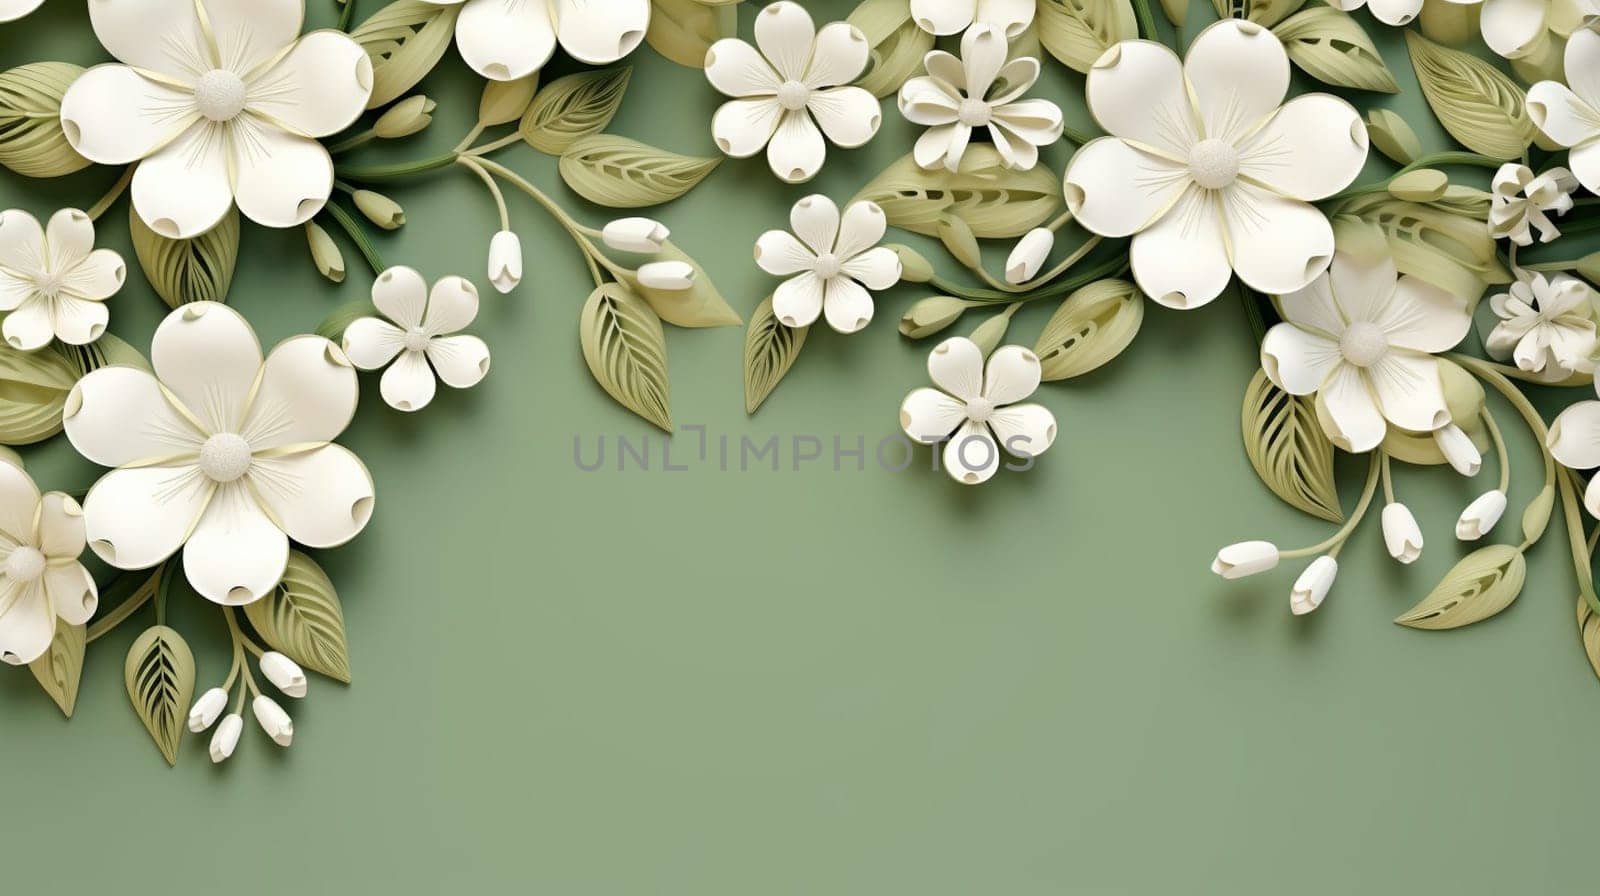 A 3D illustration of white paper flowers and green leaves on a solid dark green background, with a creative design and crafted aesthetic. High quality photo